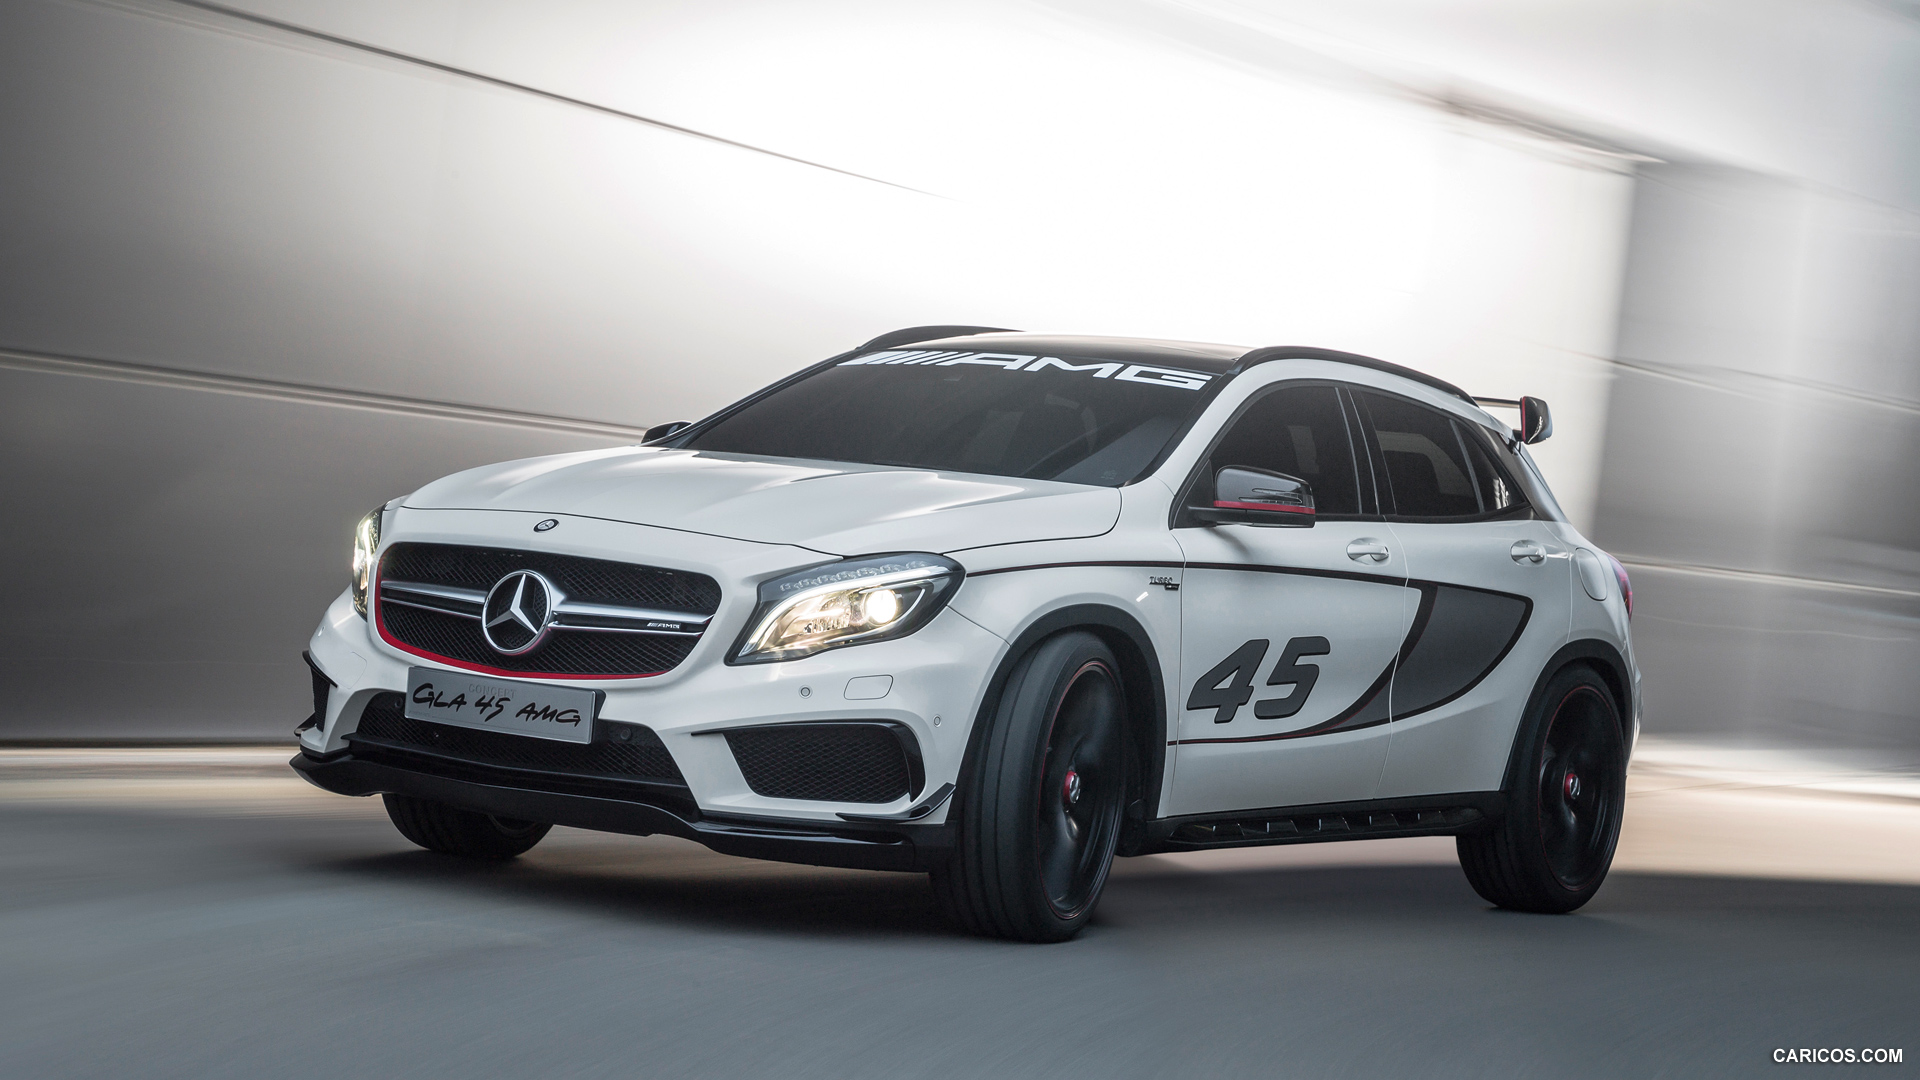 Mercedes-Benz GLA 45 AMG Concept (2013)  - Front, #12 of 15